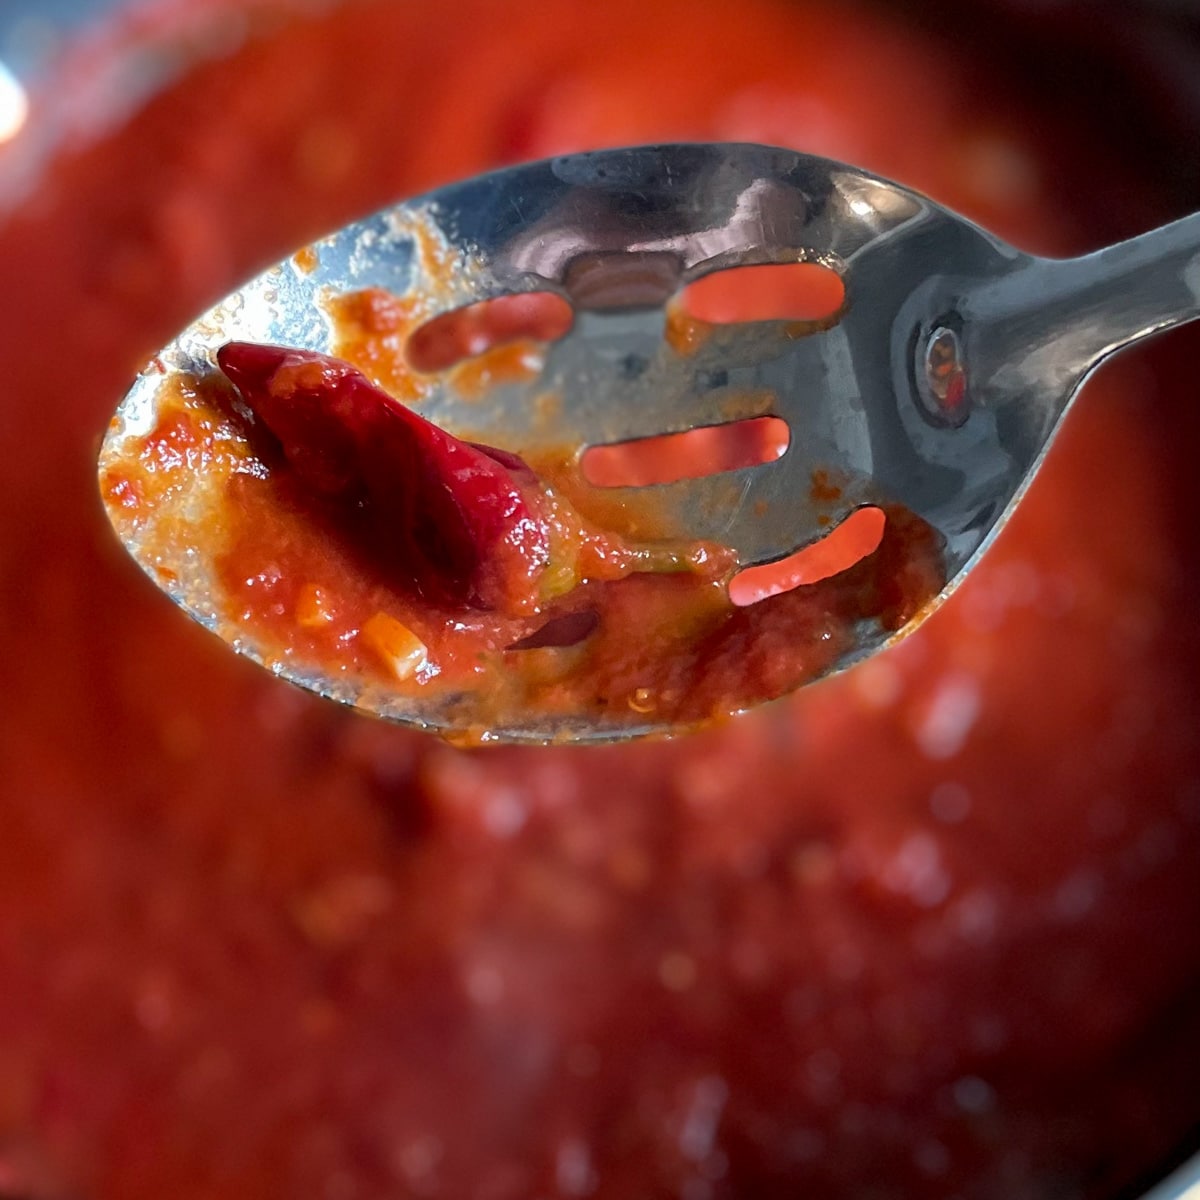 A whole Calabrian chili is removed from the arrabbiata sauce with a metal slotted spoon.